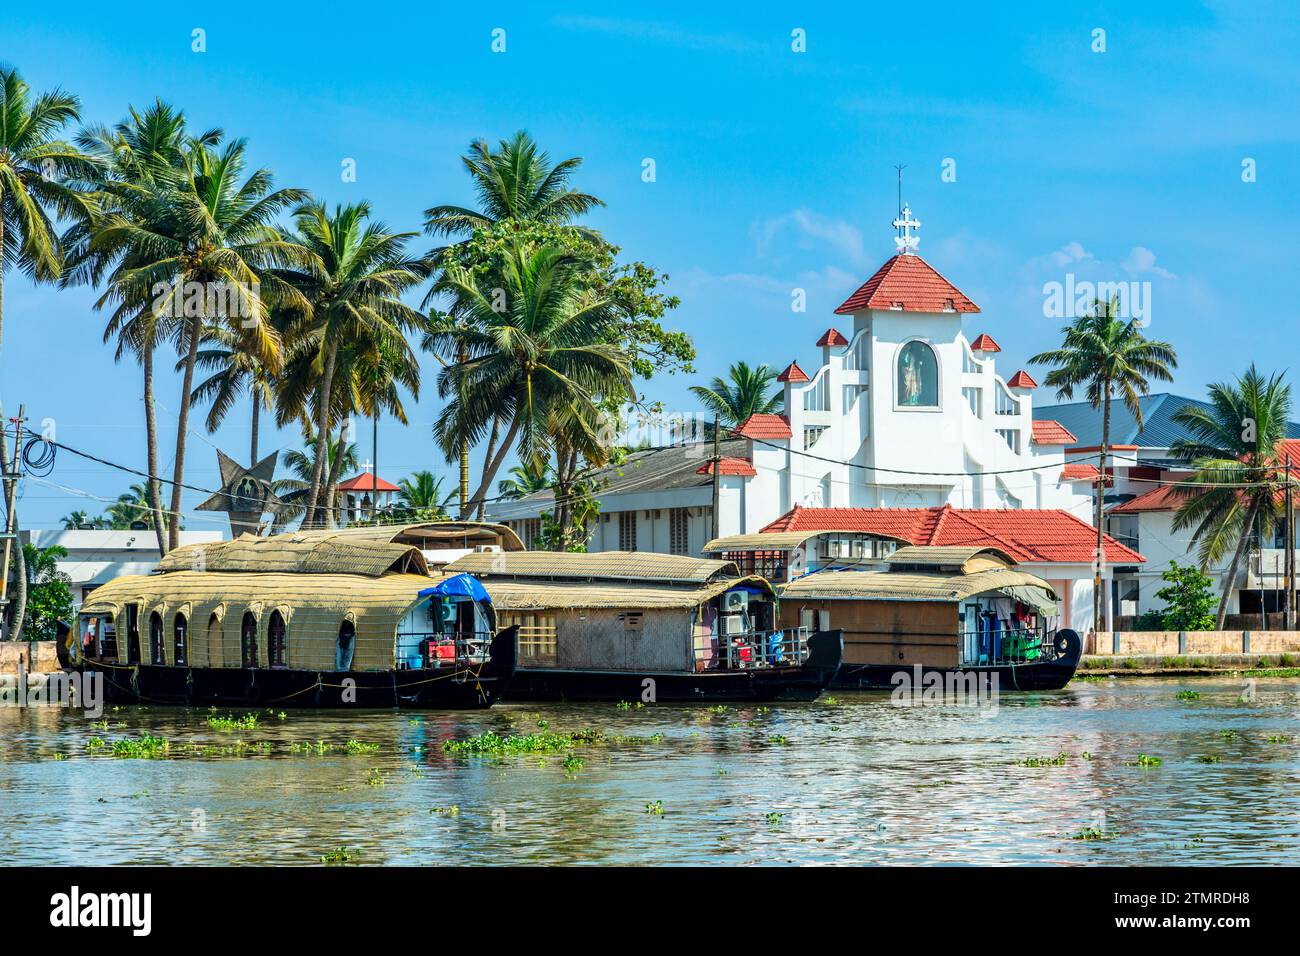 Old colonial Saint Thomas catholic church on the coast of Pamba river, with palms and anchored houseboats, Alleppey, Kerala, South India Stock Photo